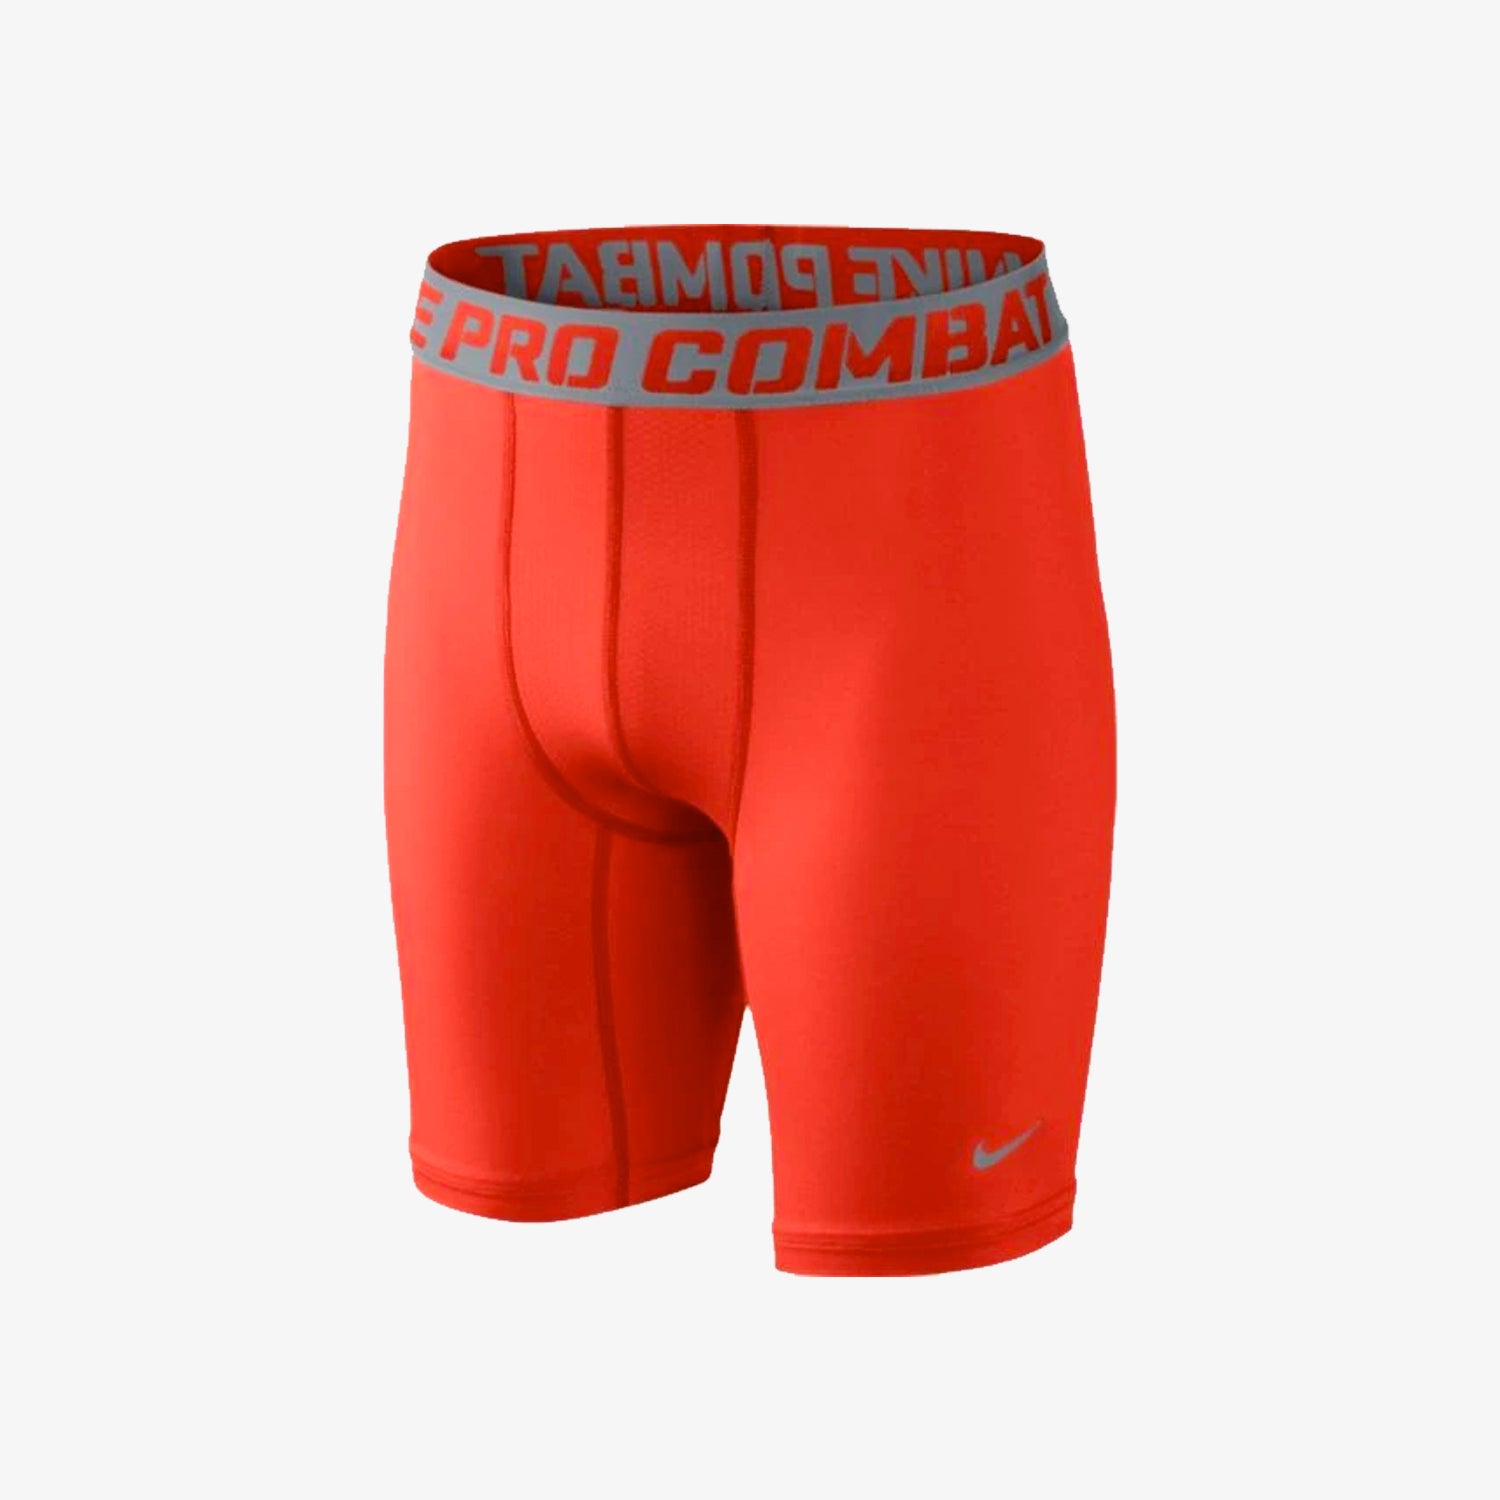 Youth Nike Pro Combat Compression Short Red M